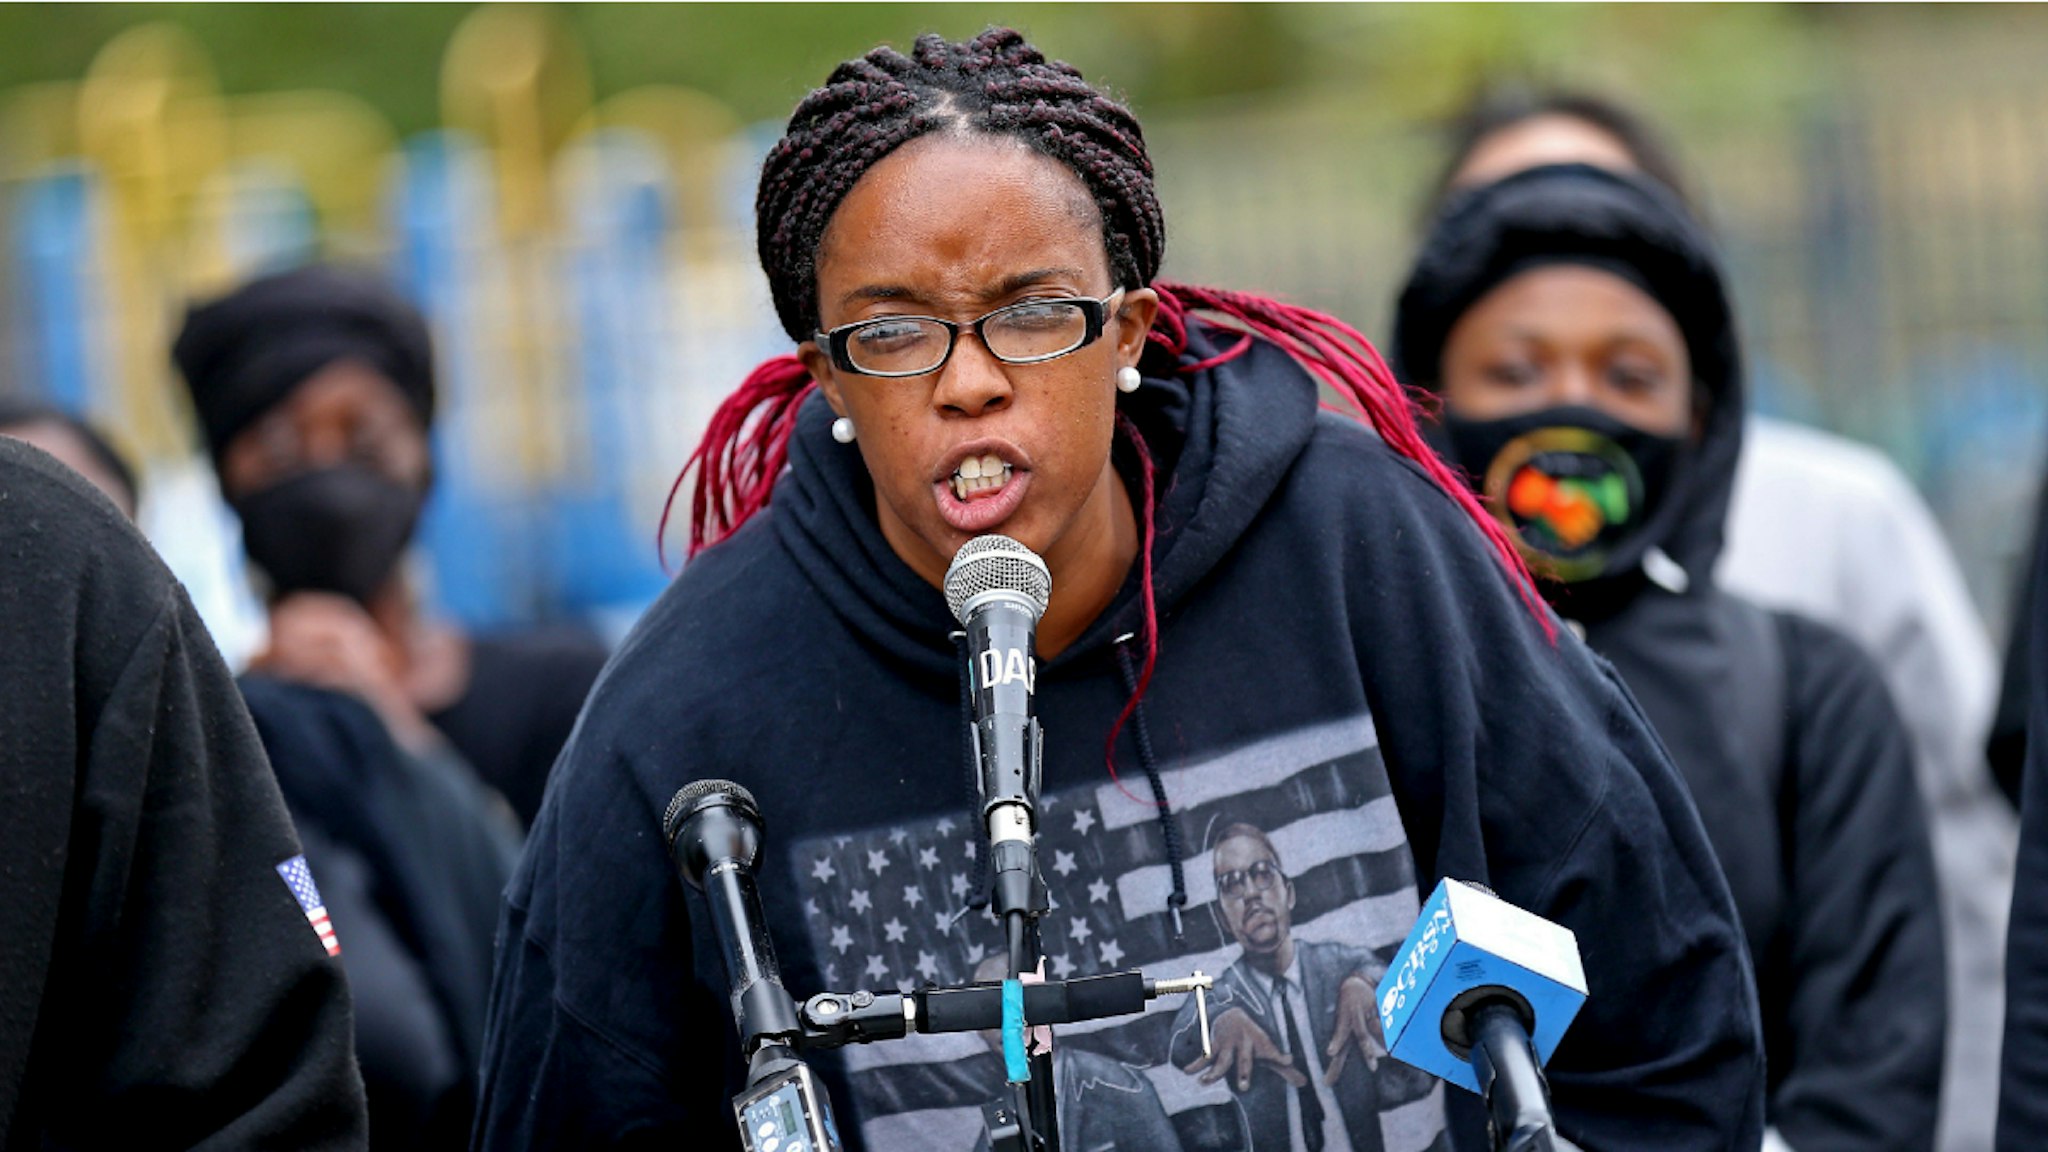 BOSTON, MA. - SEPTEMBER 22: Monica Cannon-Grant speaks during a Black Lives Matter rally in front of Boston Police Headquarters on September 22, 2020 in Boston, Massachusetts.